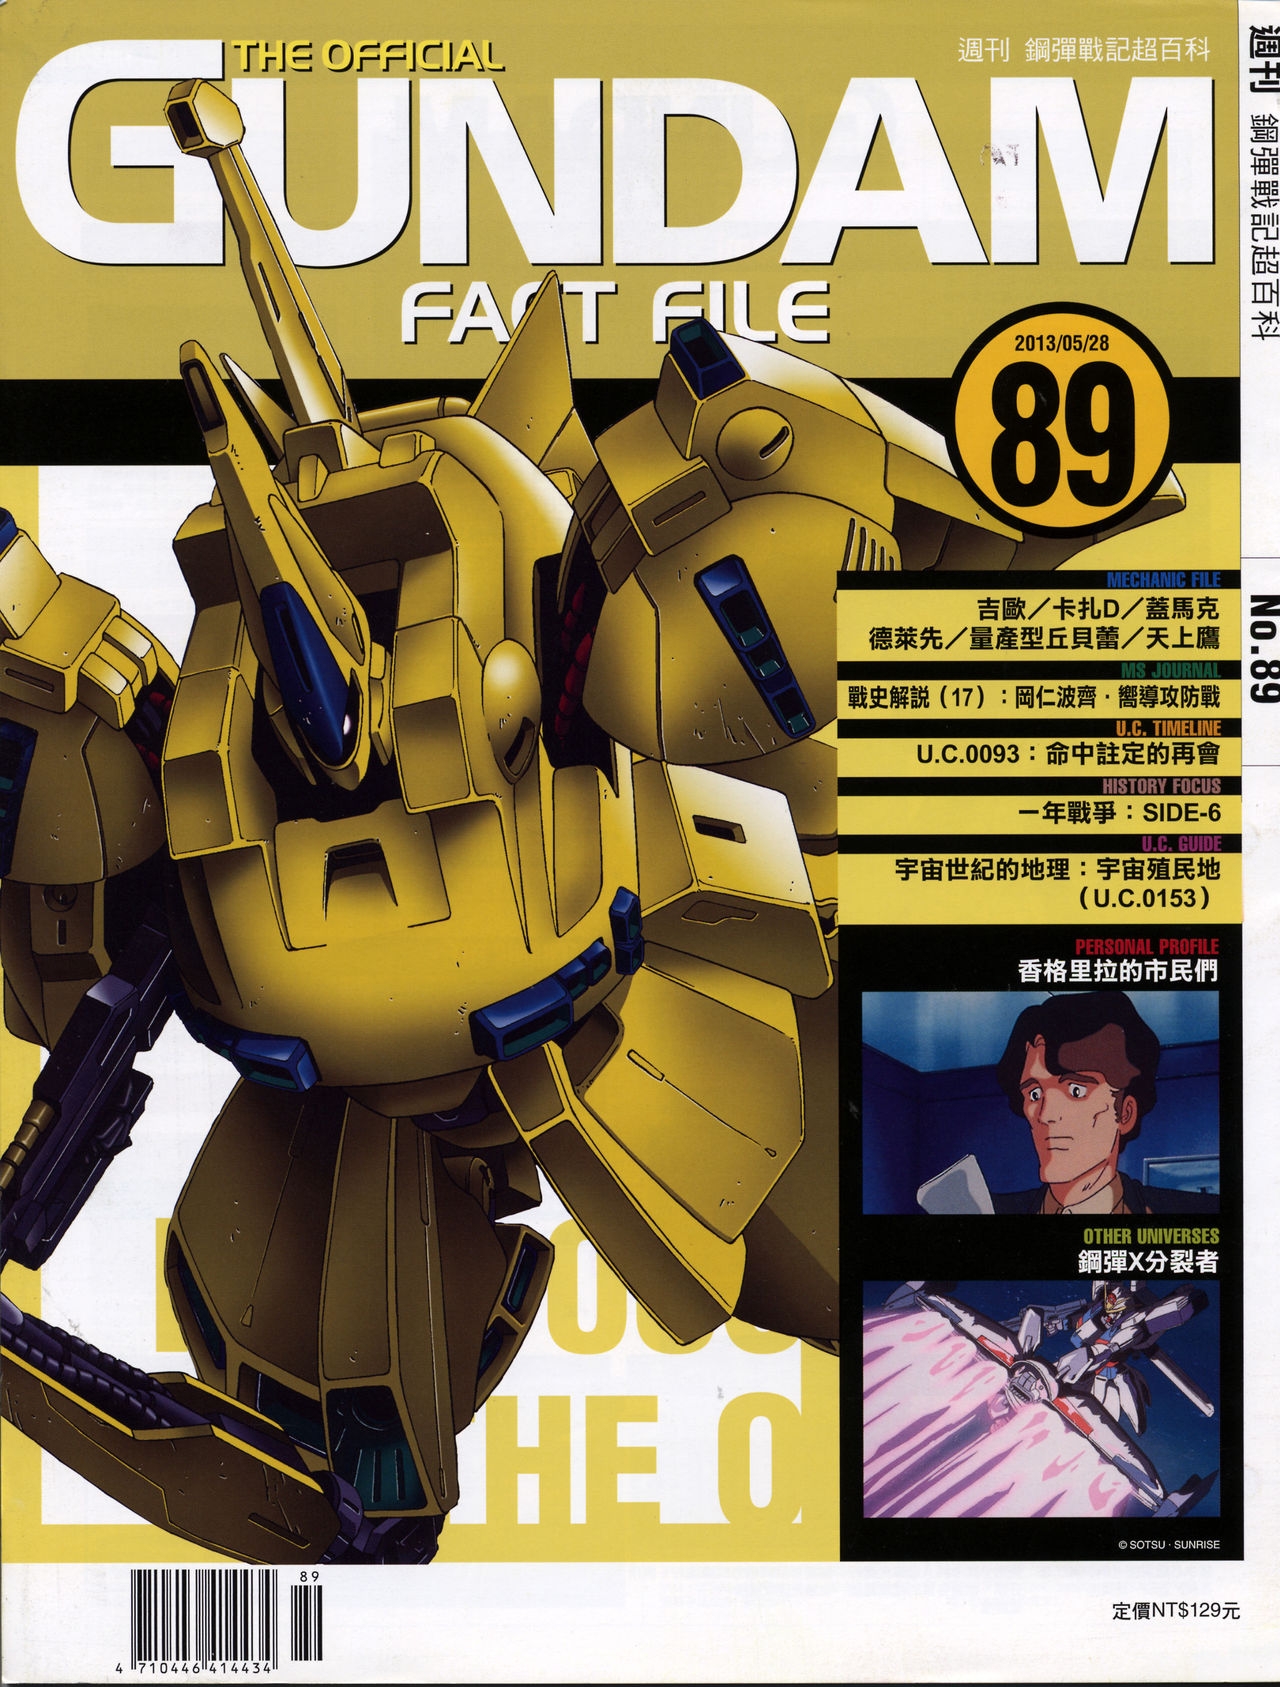 The Official Gundam Fact File - 089 [Chinese] 35